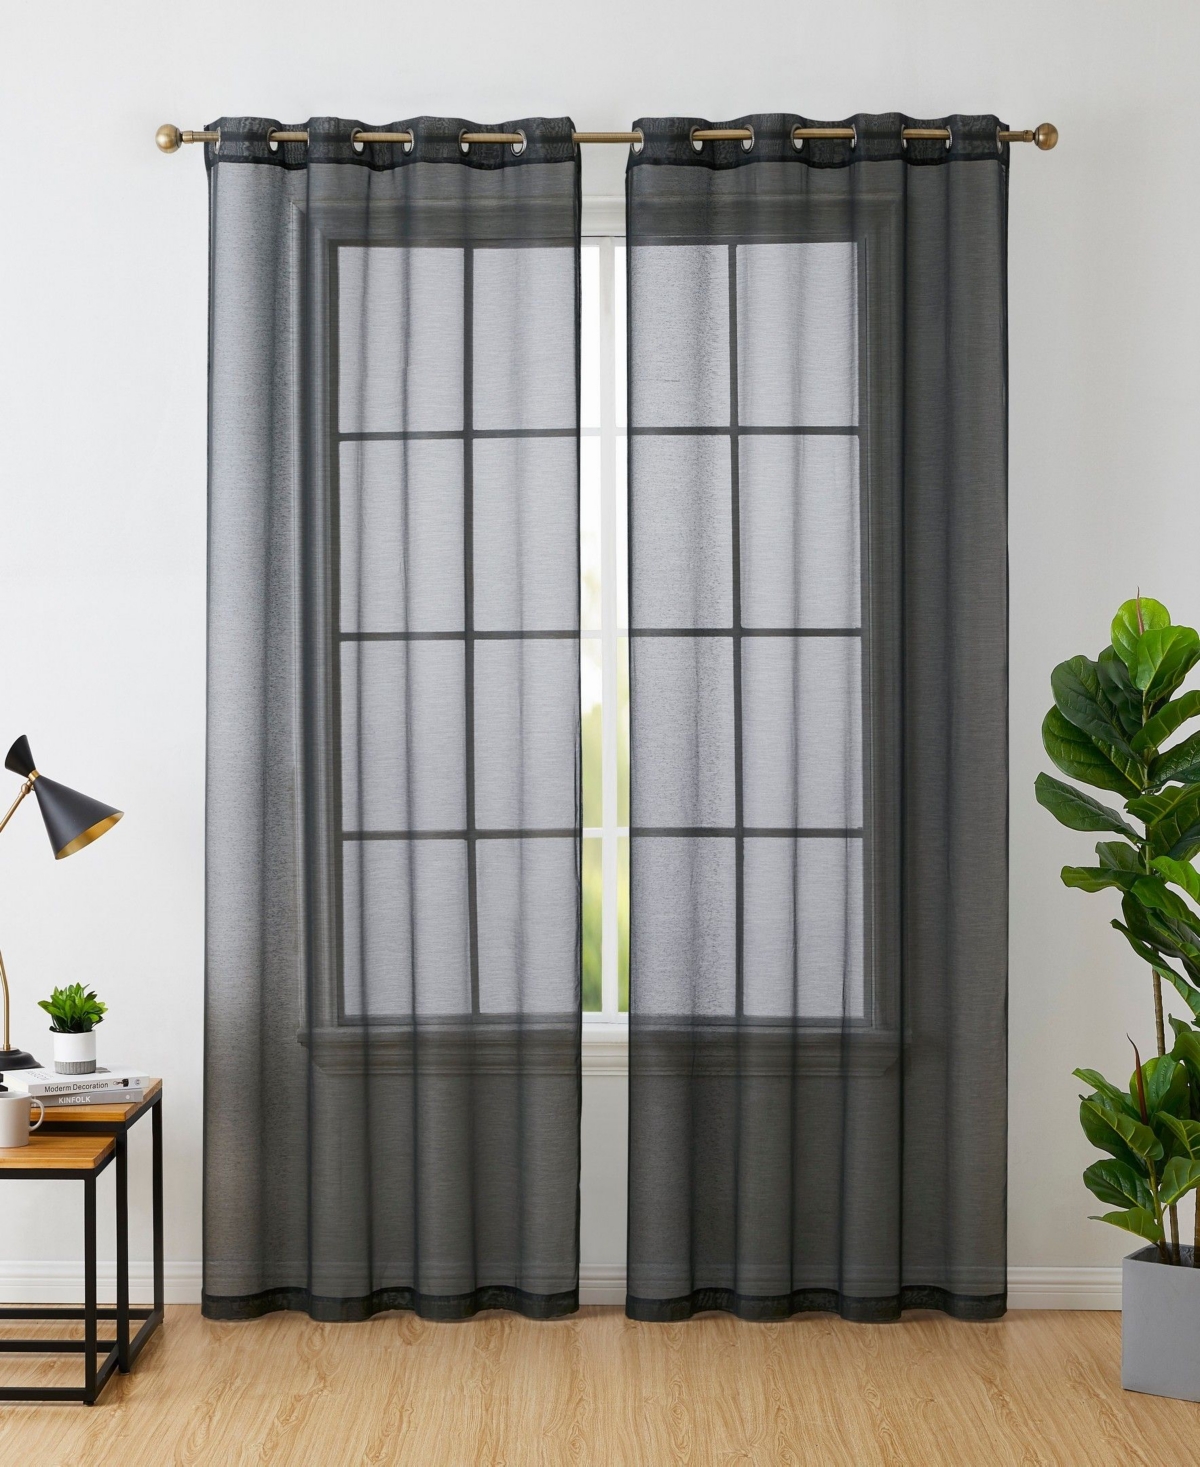 HLC.ME 2 Piece Semi Sheer Voile Window Curtain Drapes Grommet Panels for Living 